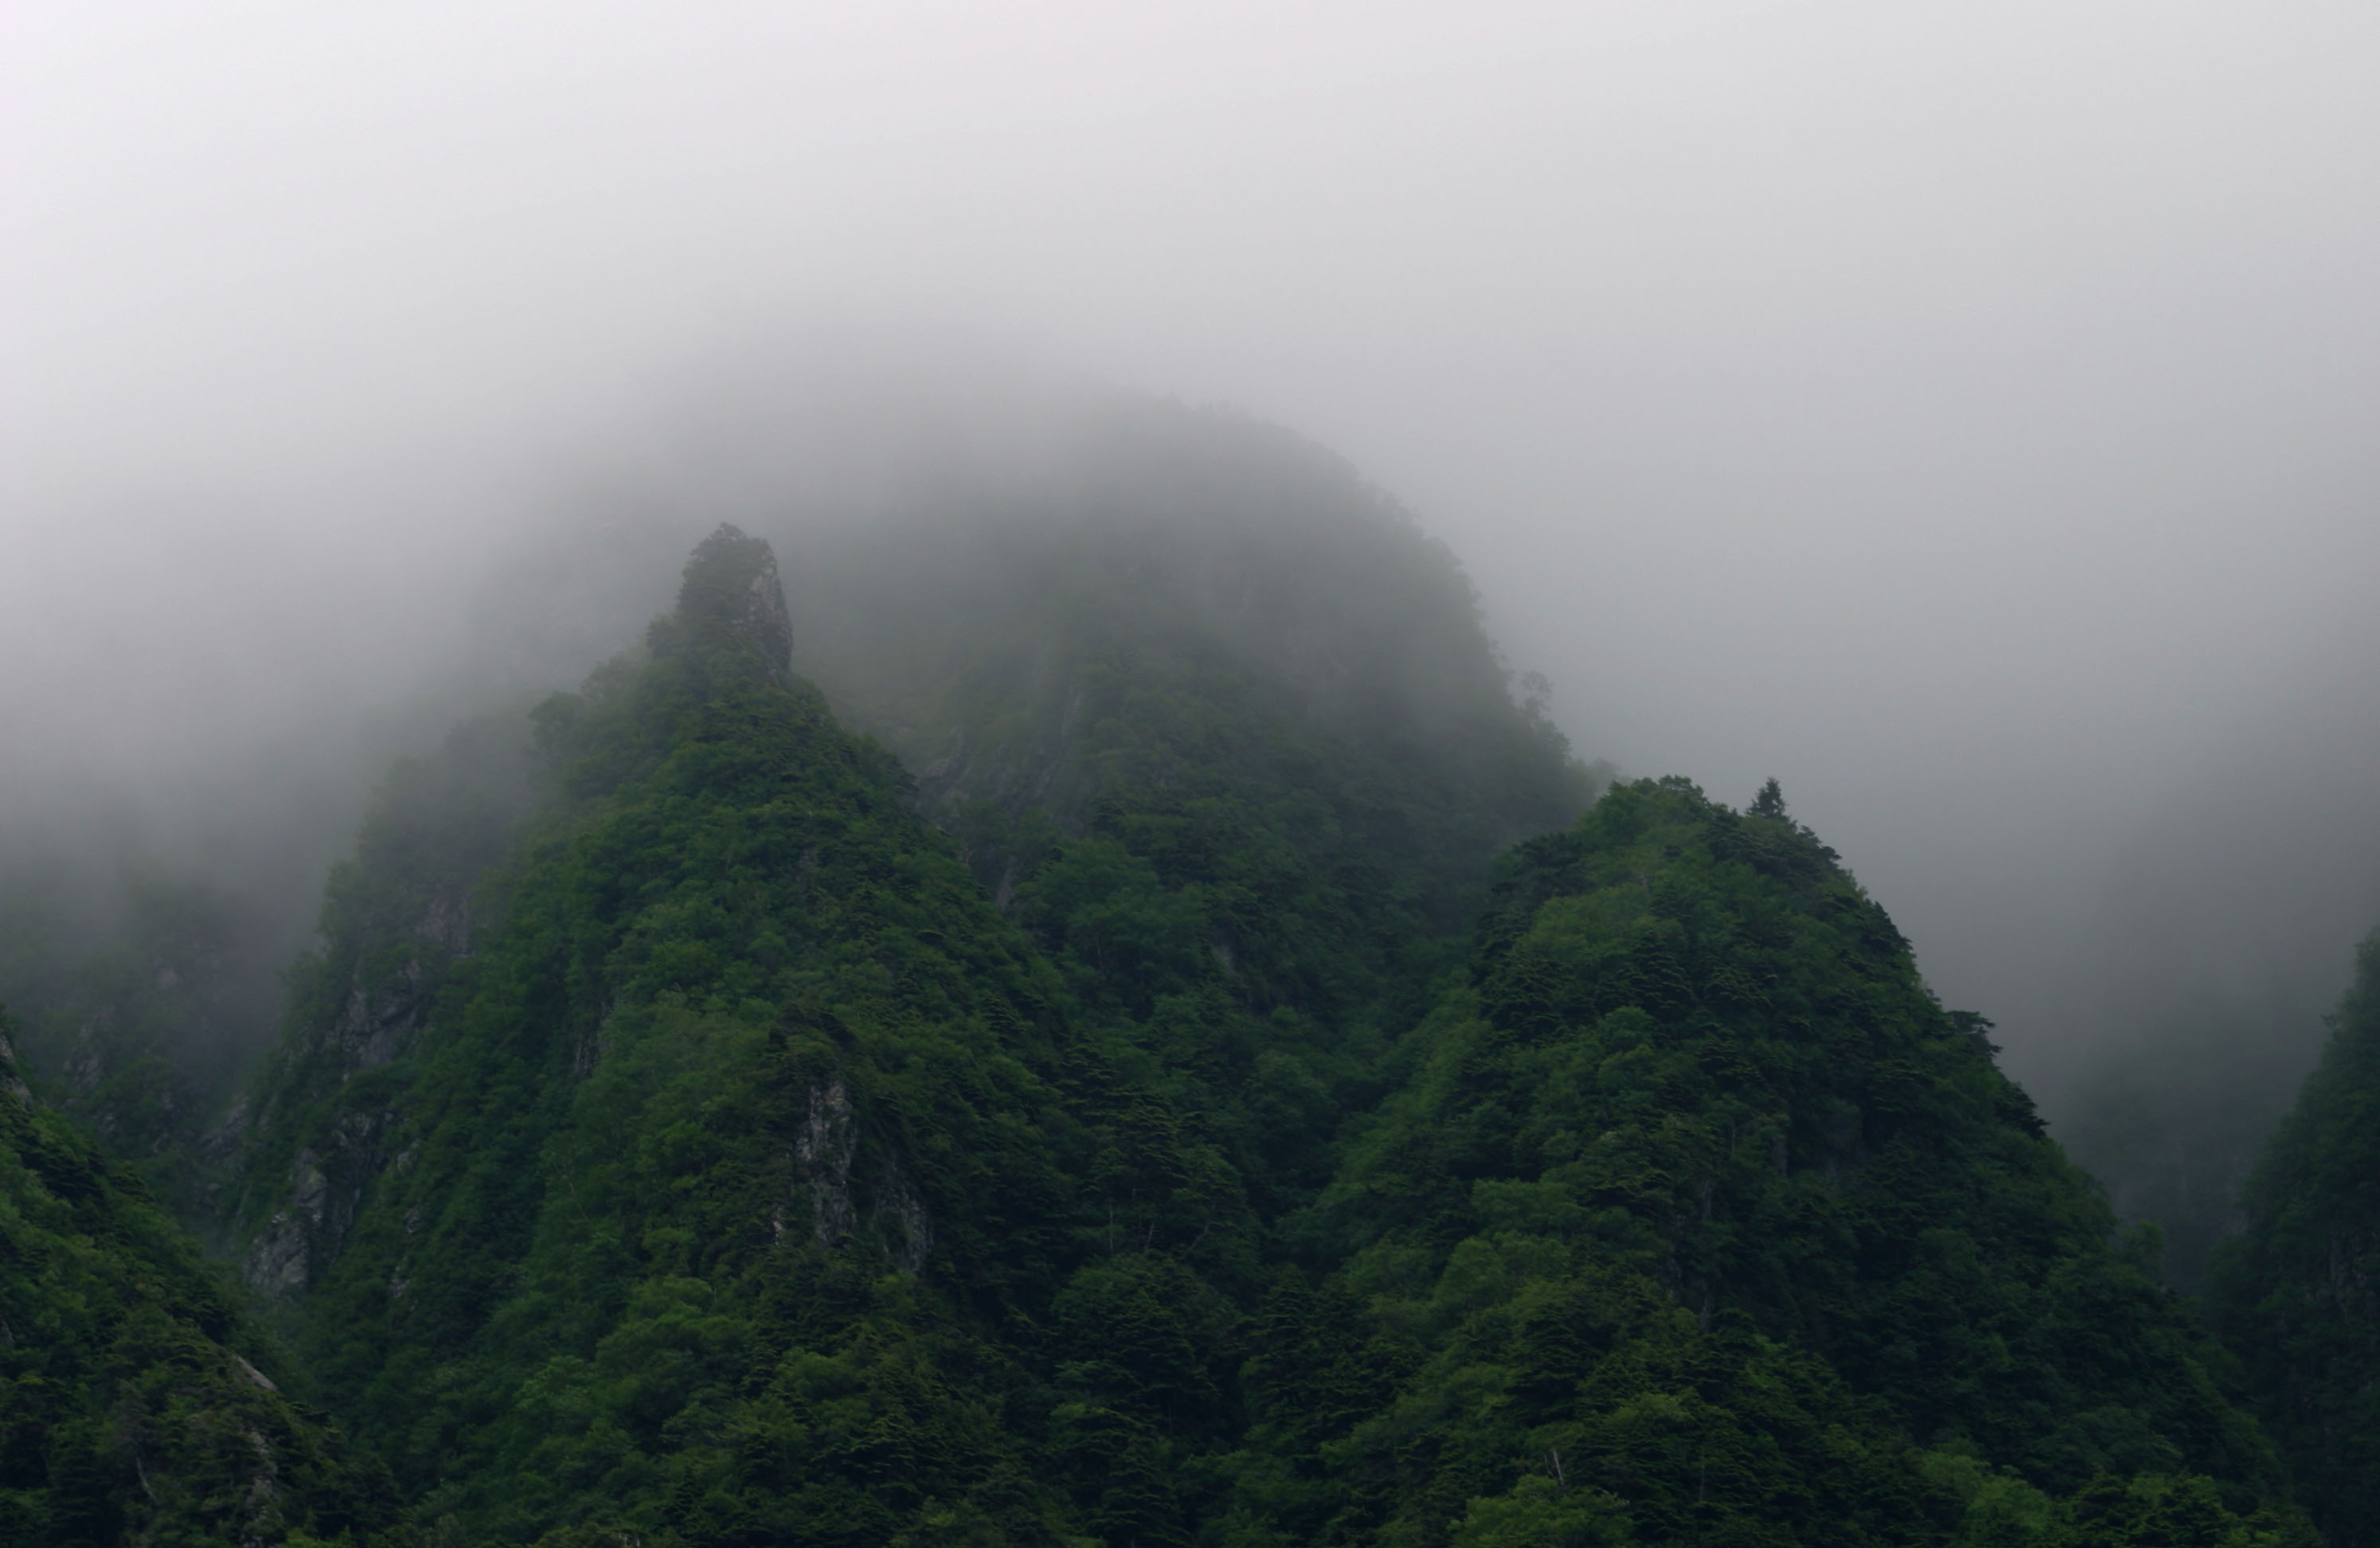 photo,material,free,landscape,picture,stock photo,Creative Commons,Mist in deep mountains, fog, mist, cloud, mountain